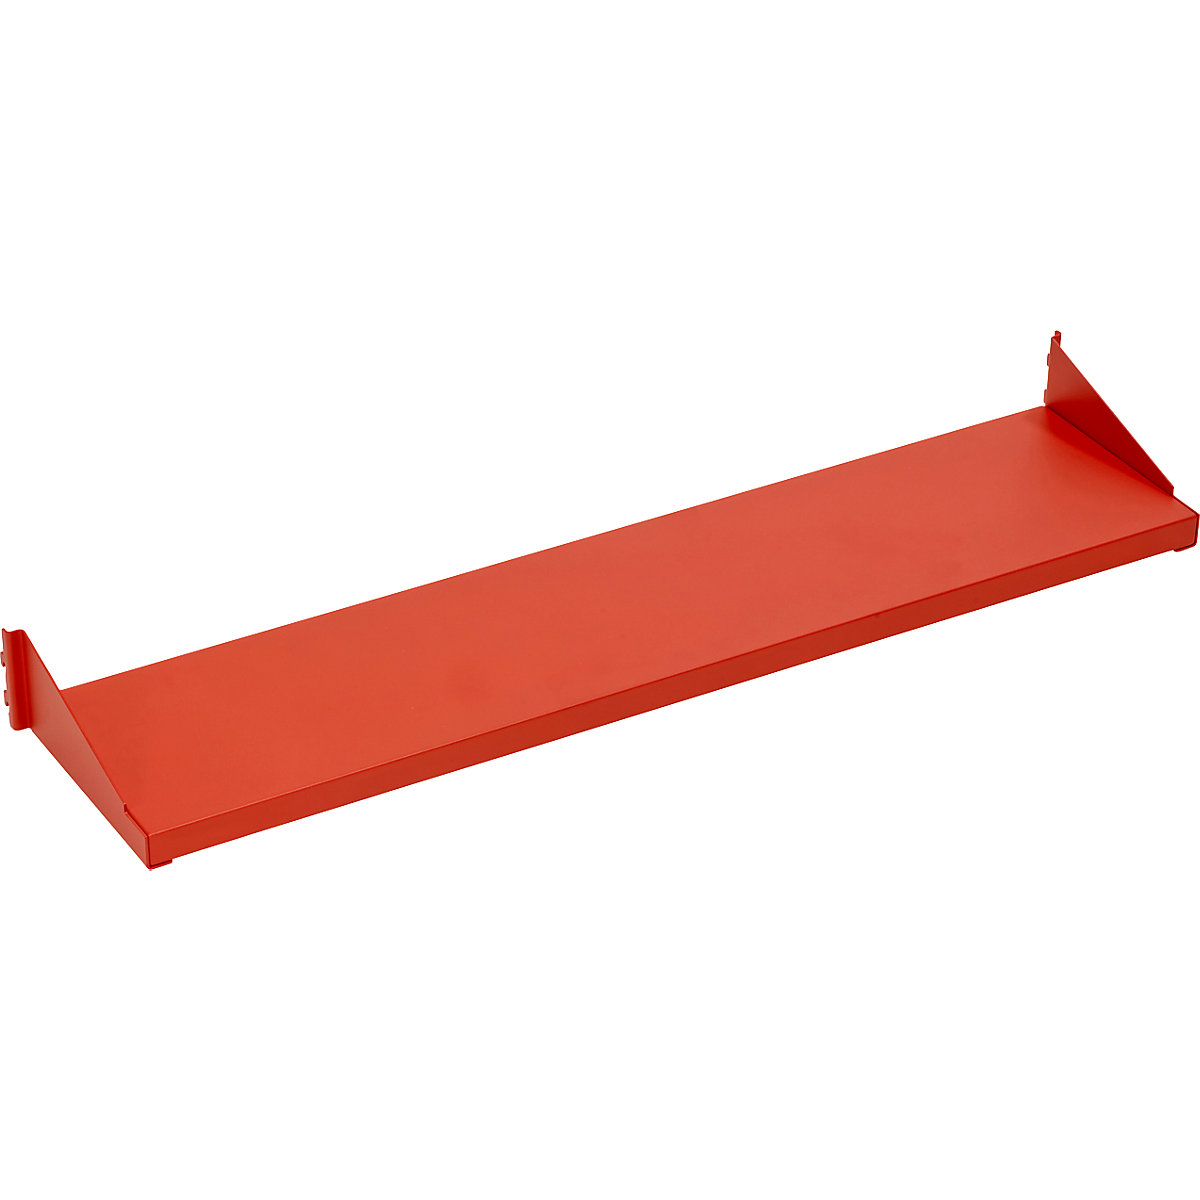 Top shelf, for securing to add-on rails, for bench width 1400 mm-2